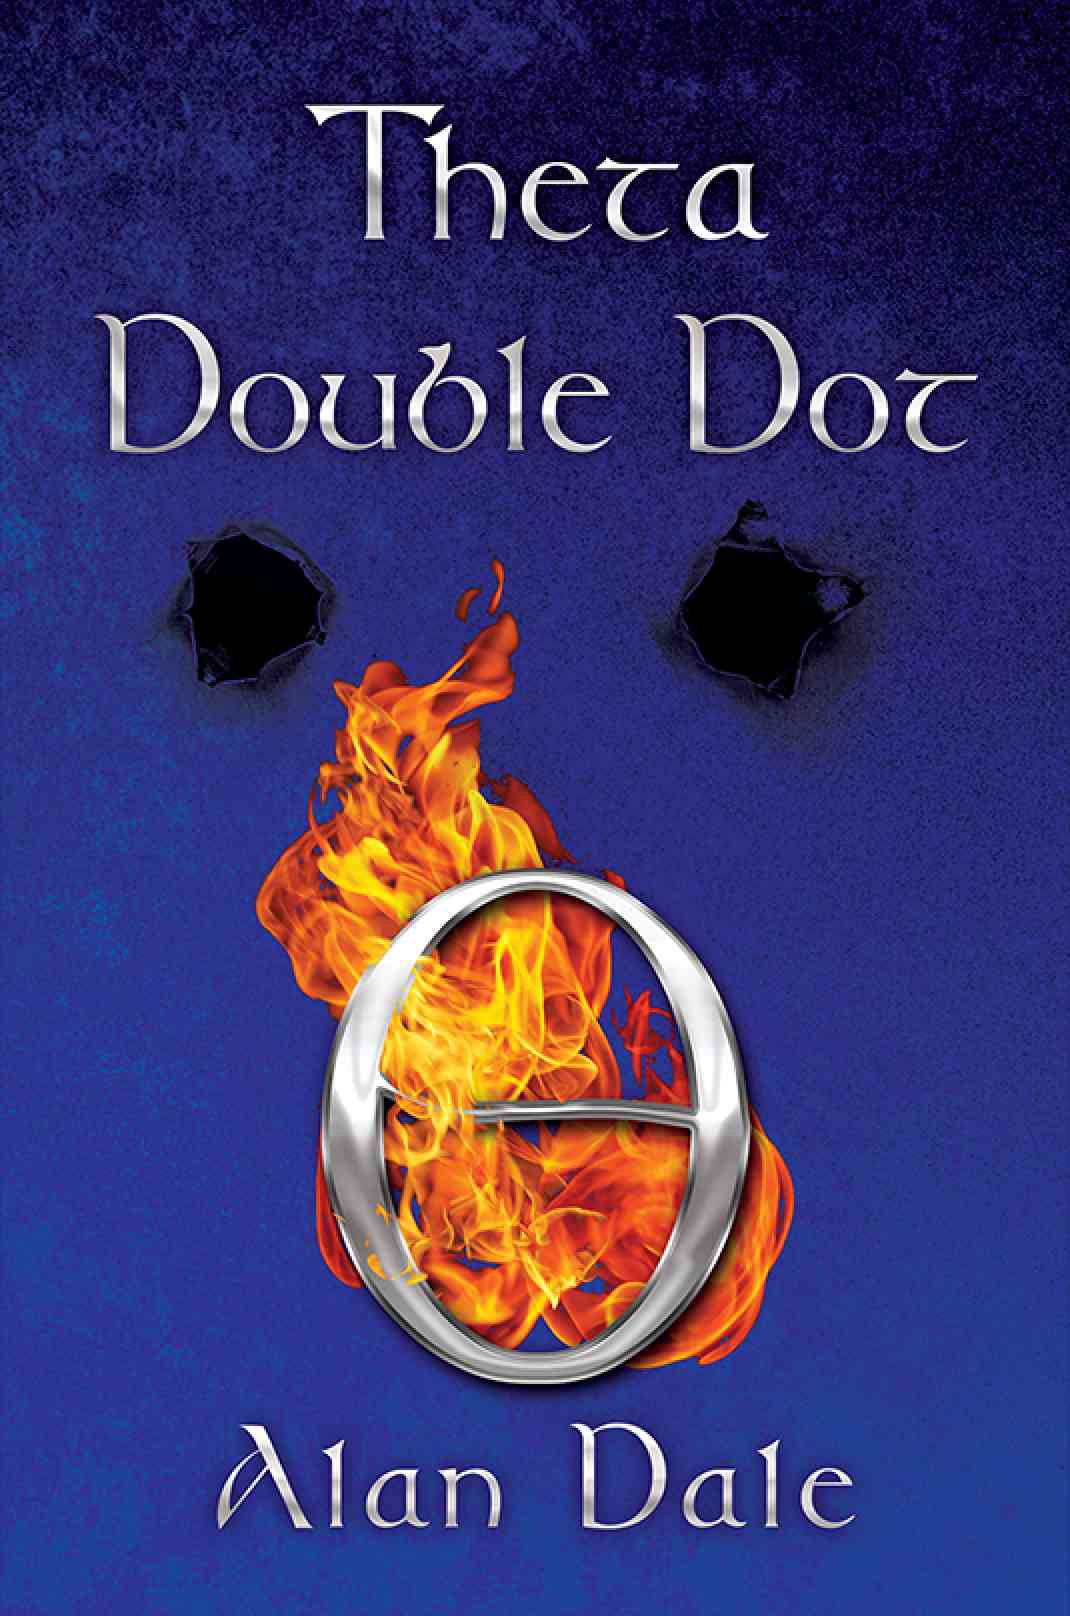 The Writers Bureau Facebook Page Featured the Book Theta Double Dot by Alan Dale